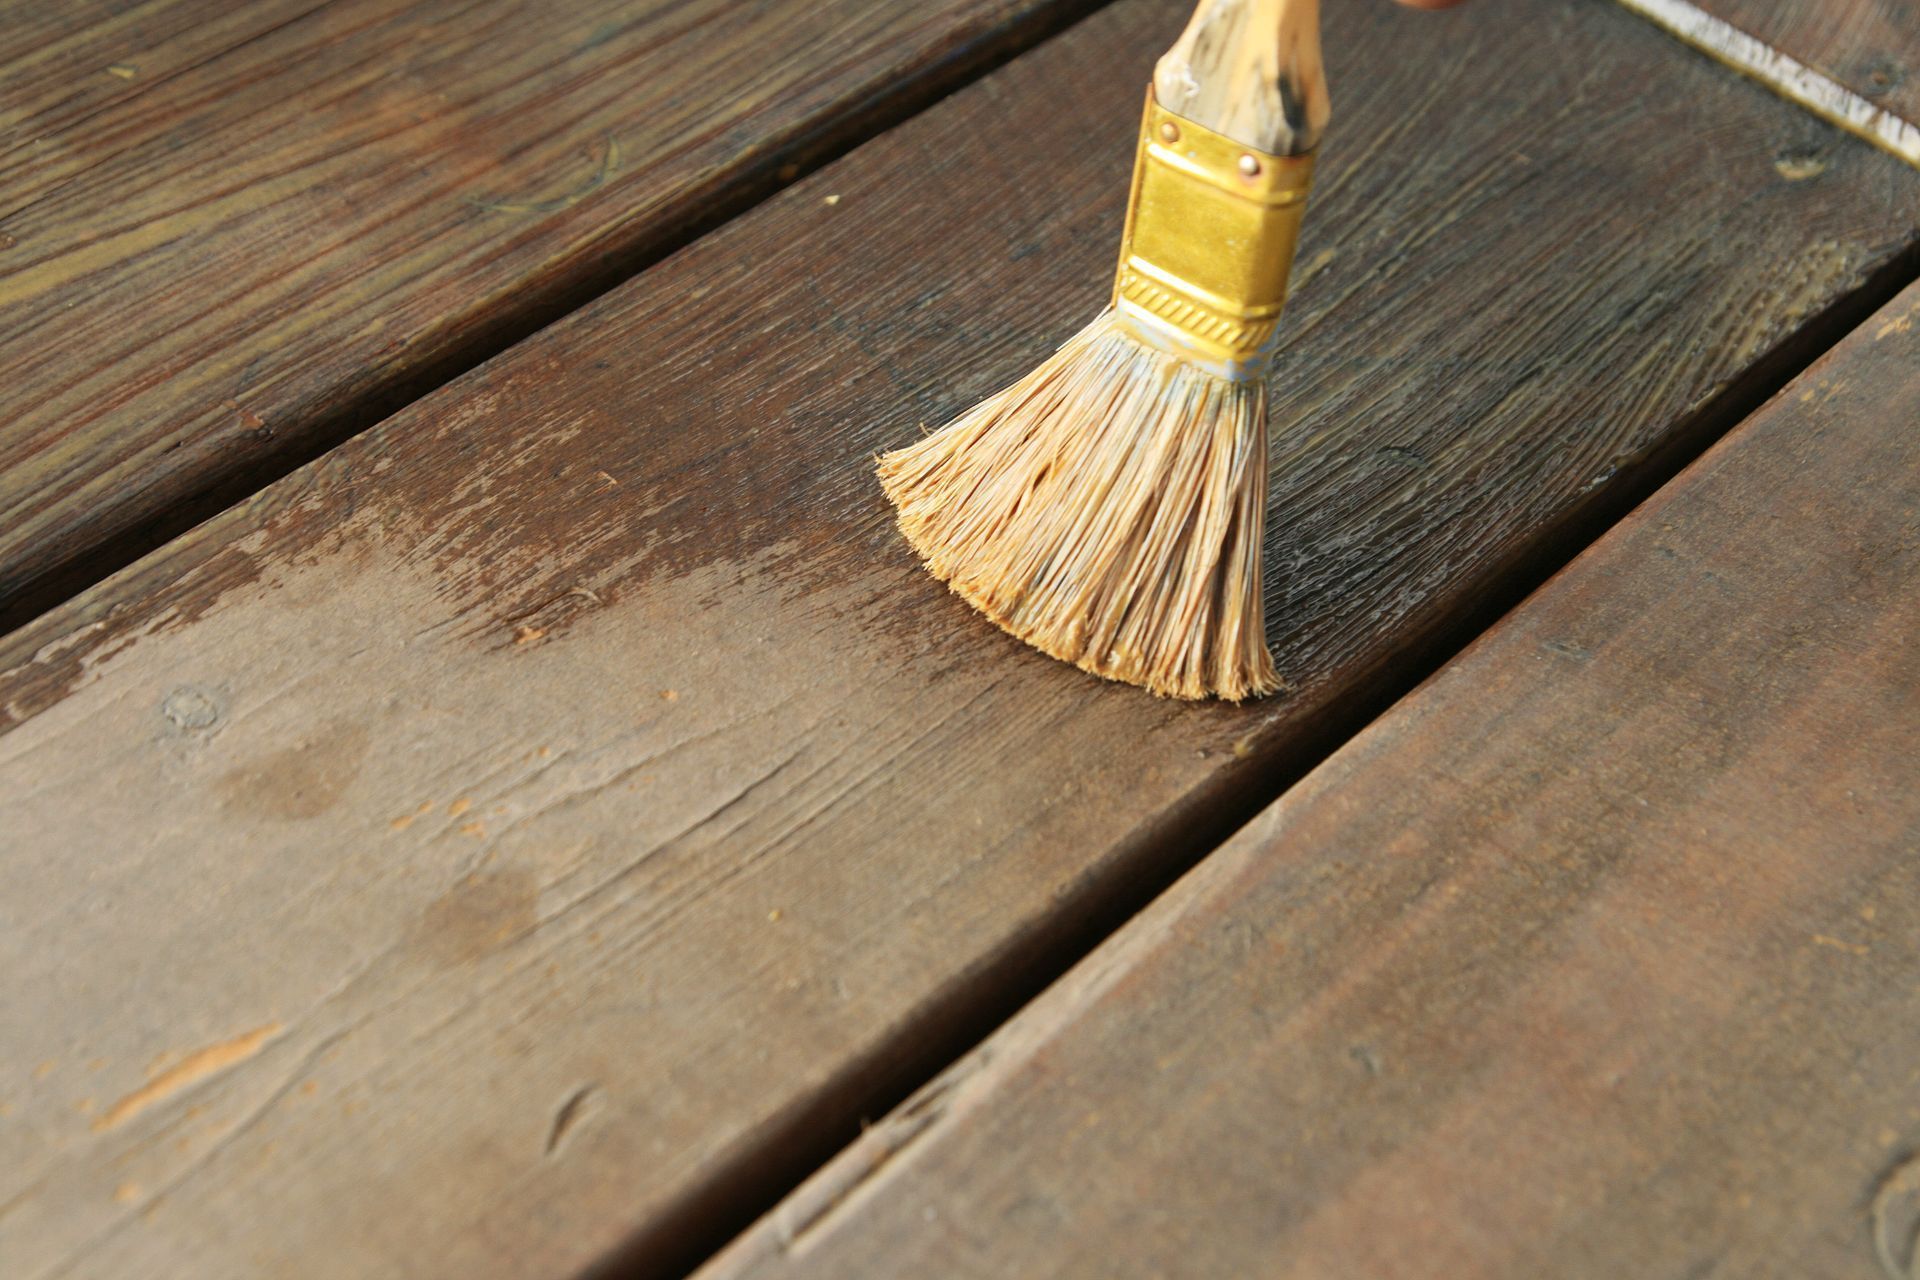 A used paintbrush with worn bristles rests on a partially stained wooden deck in Athens, Georgia, illustrating a work in progress. The old deck boards show signs of wear and previous paint layers, with a clear distinction between the unstained and freshly stained areas, demonstrating the renewing effect of the stain application.